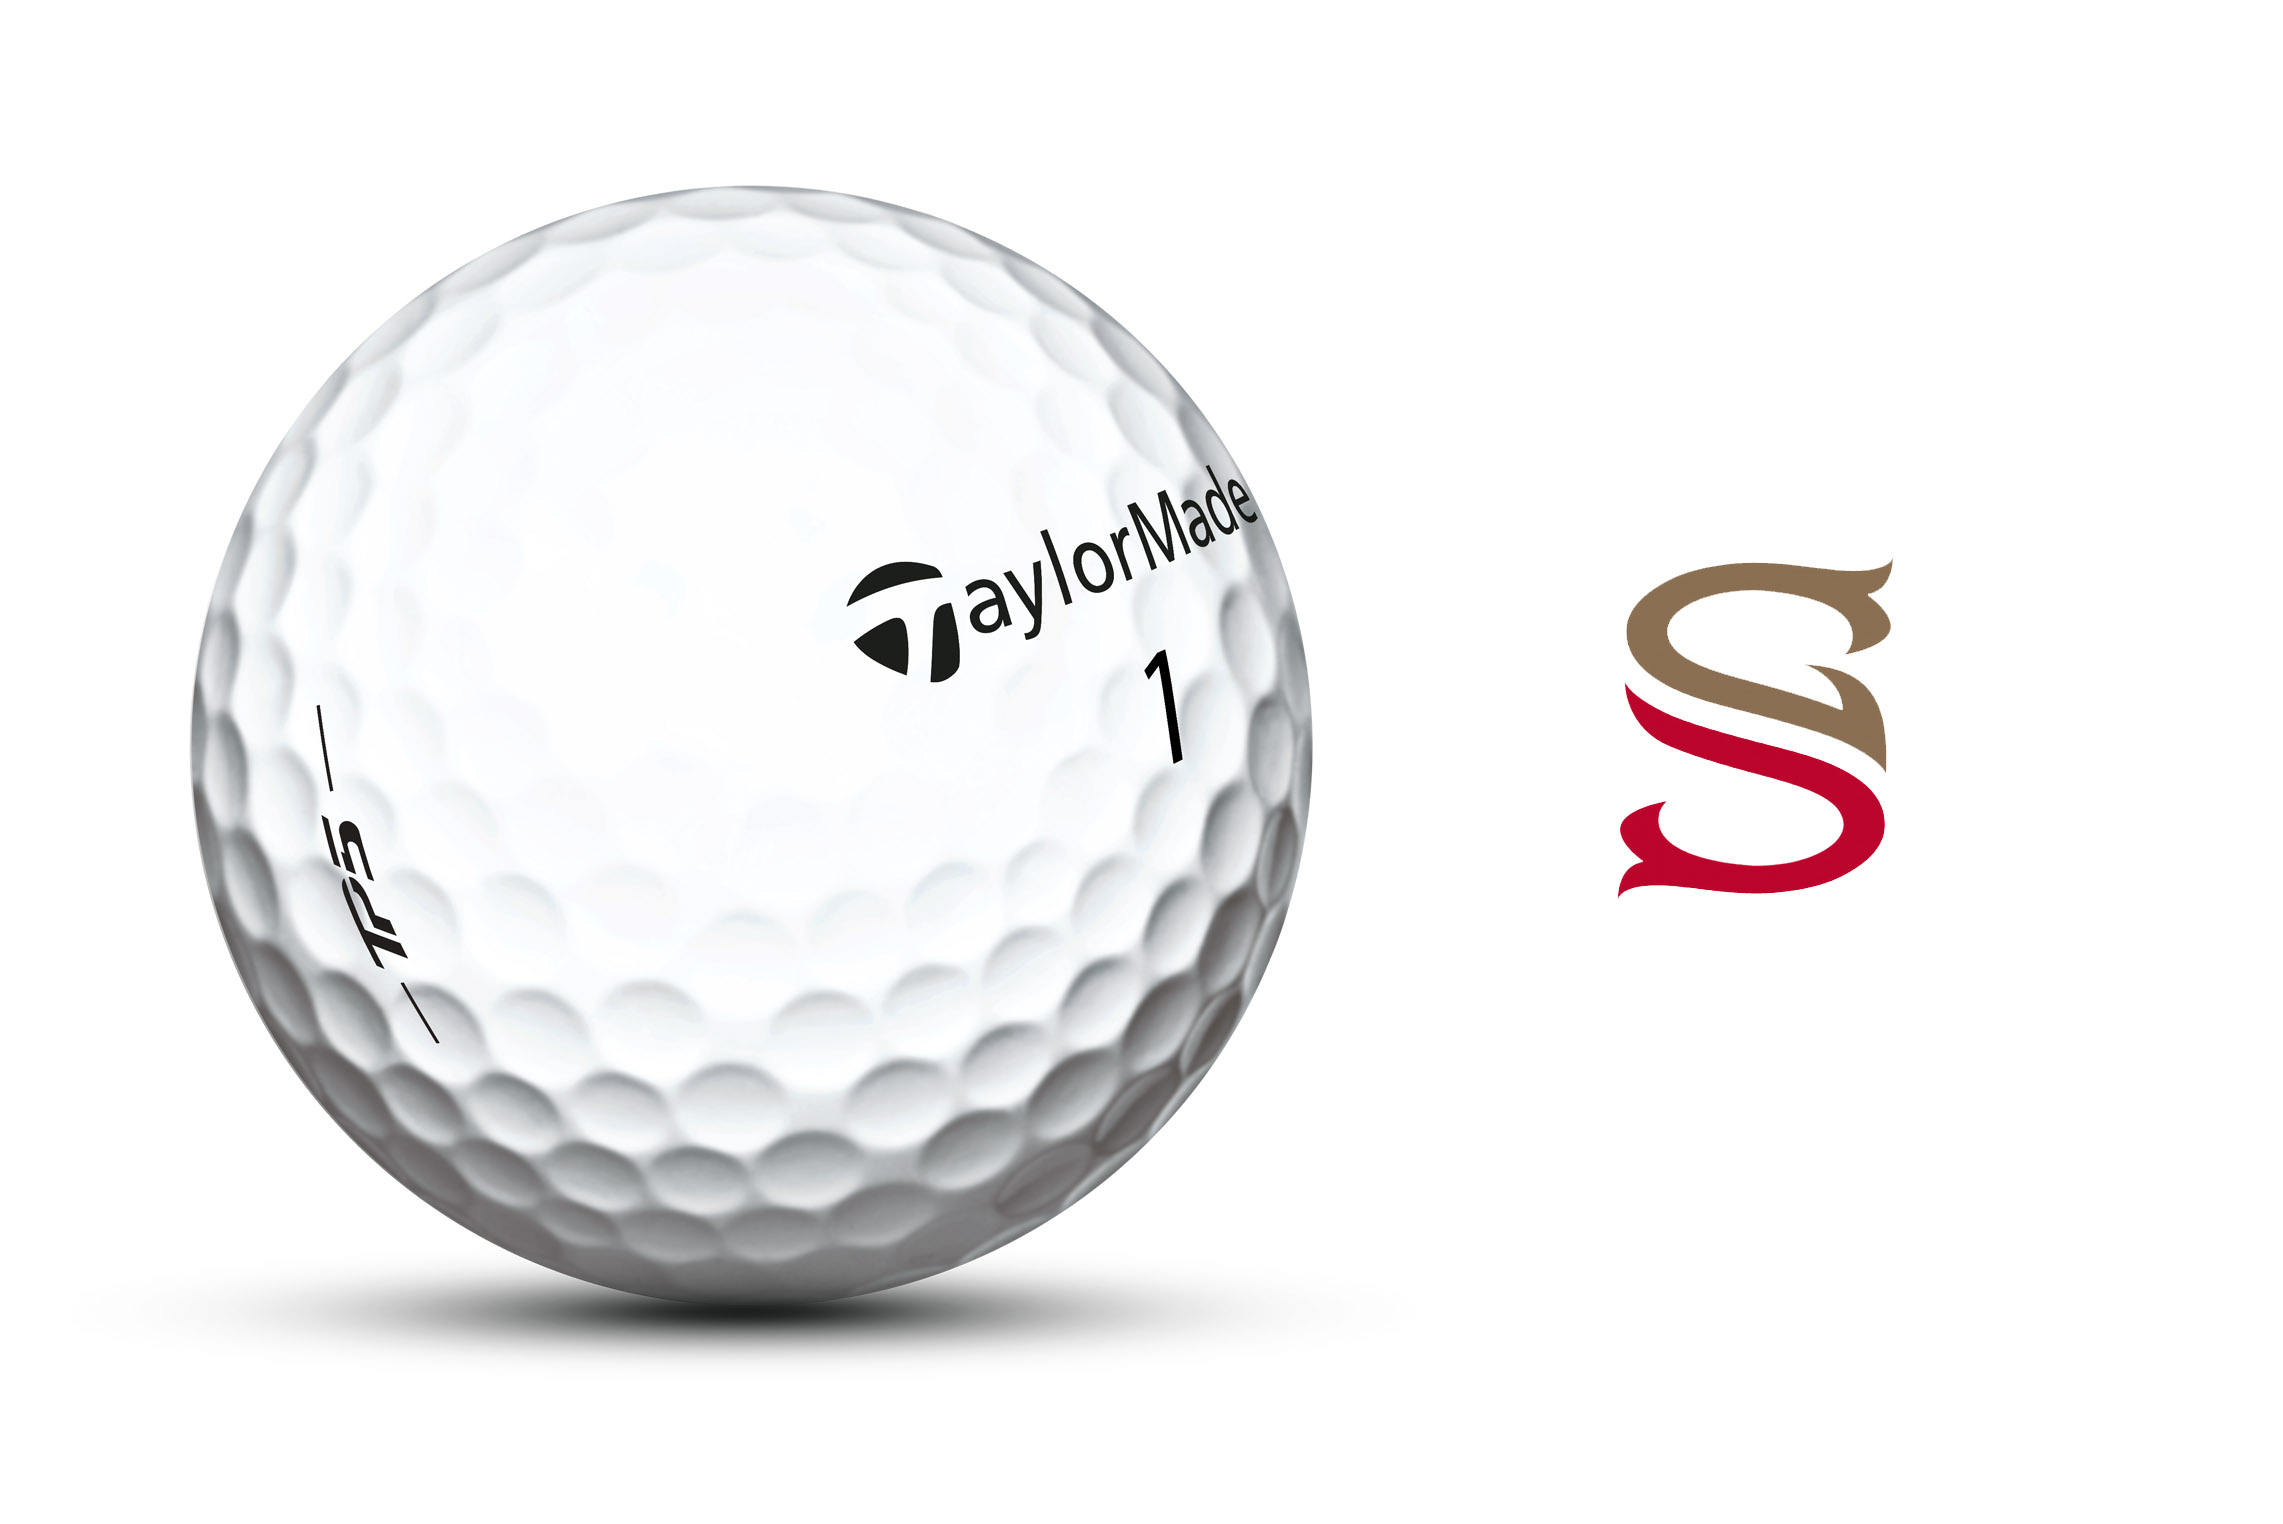 WIN! a year's supply of TaylorMade TP5 balls as used by Sergio Garcia!